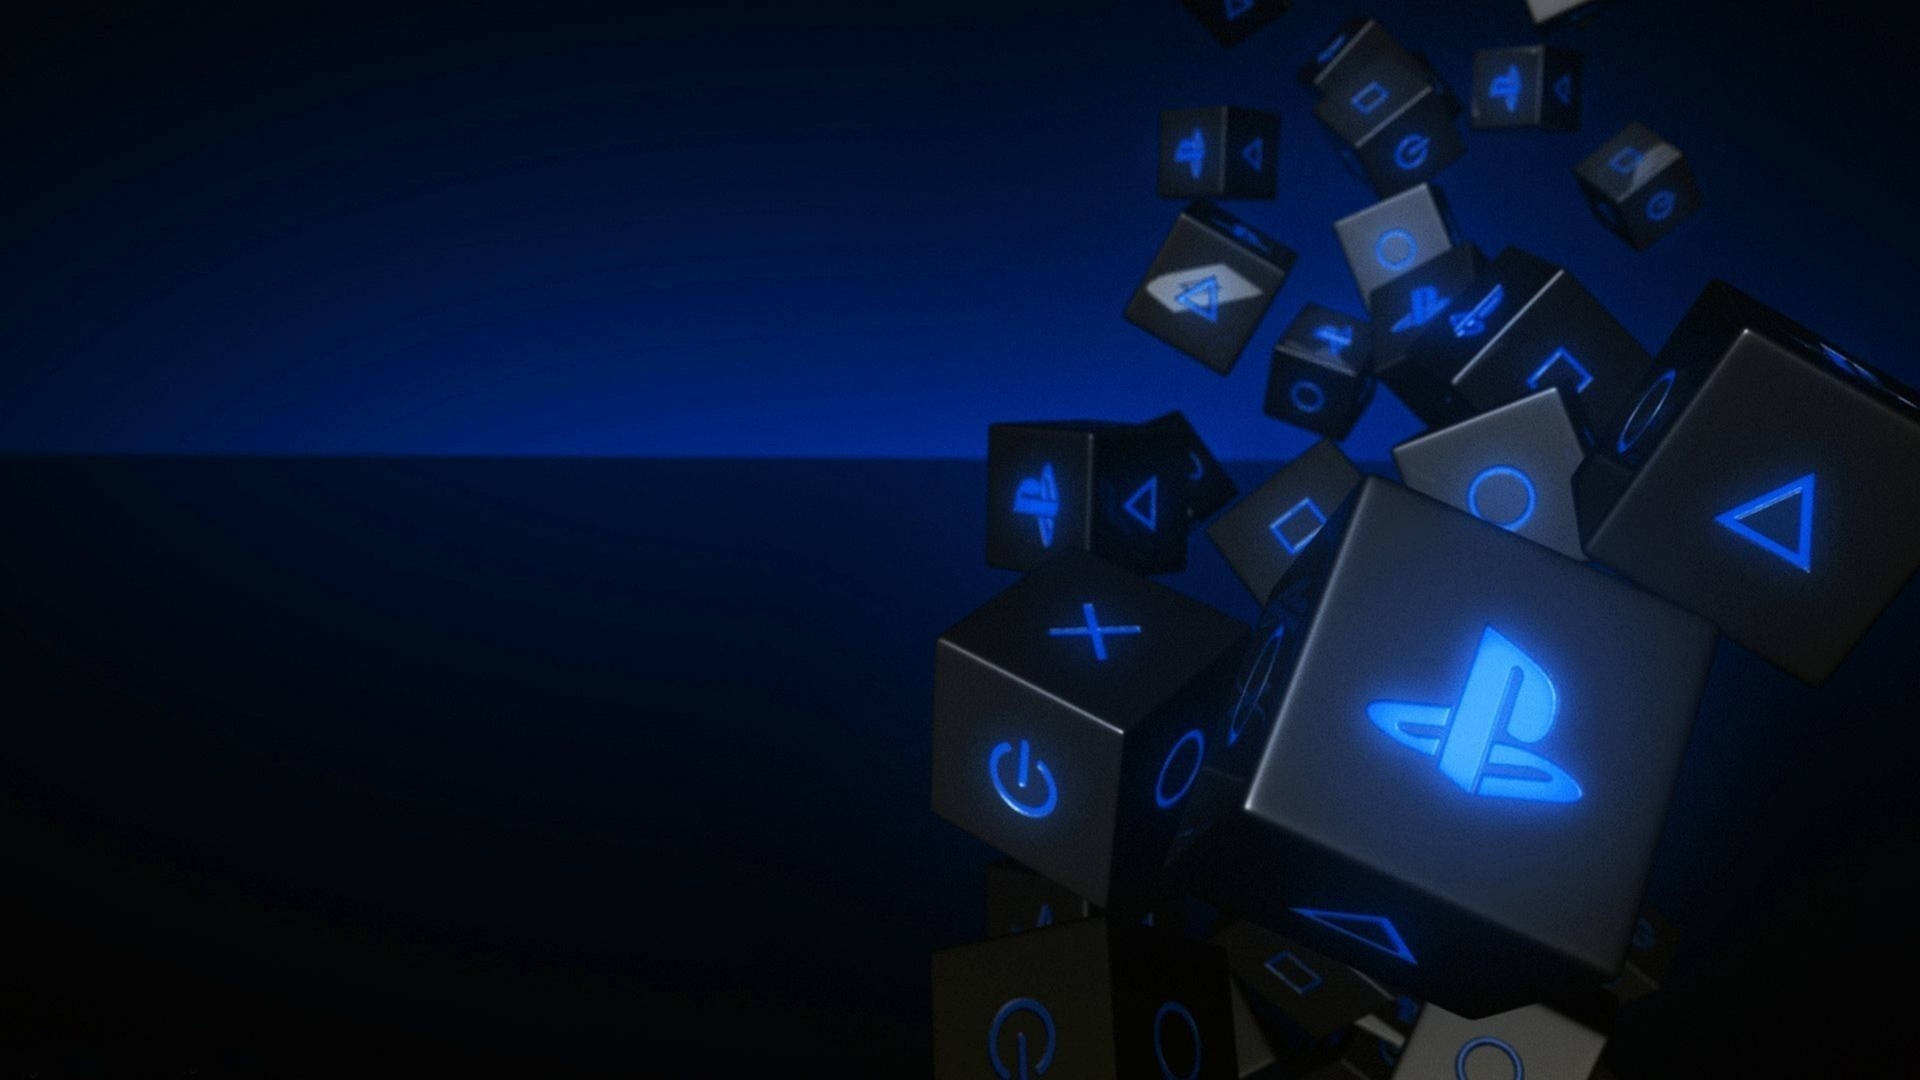 Brand Logos And Icons On Cubes 4k Ps4 Background